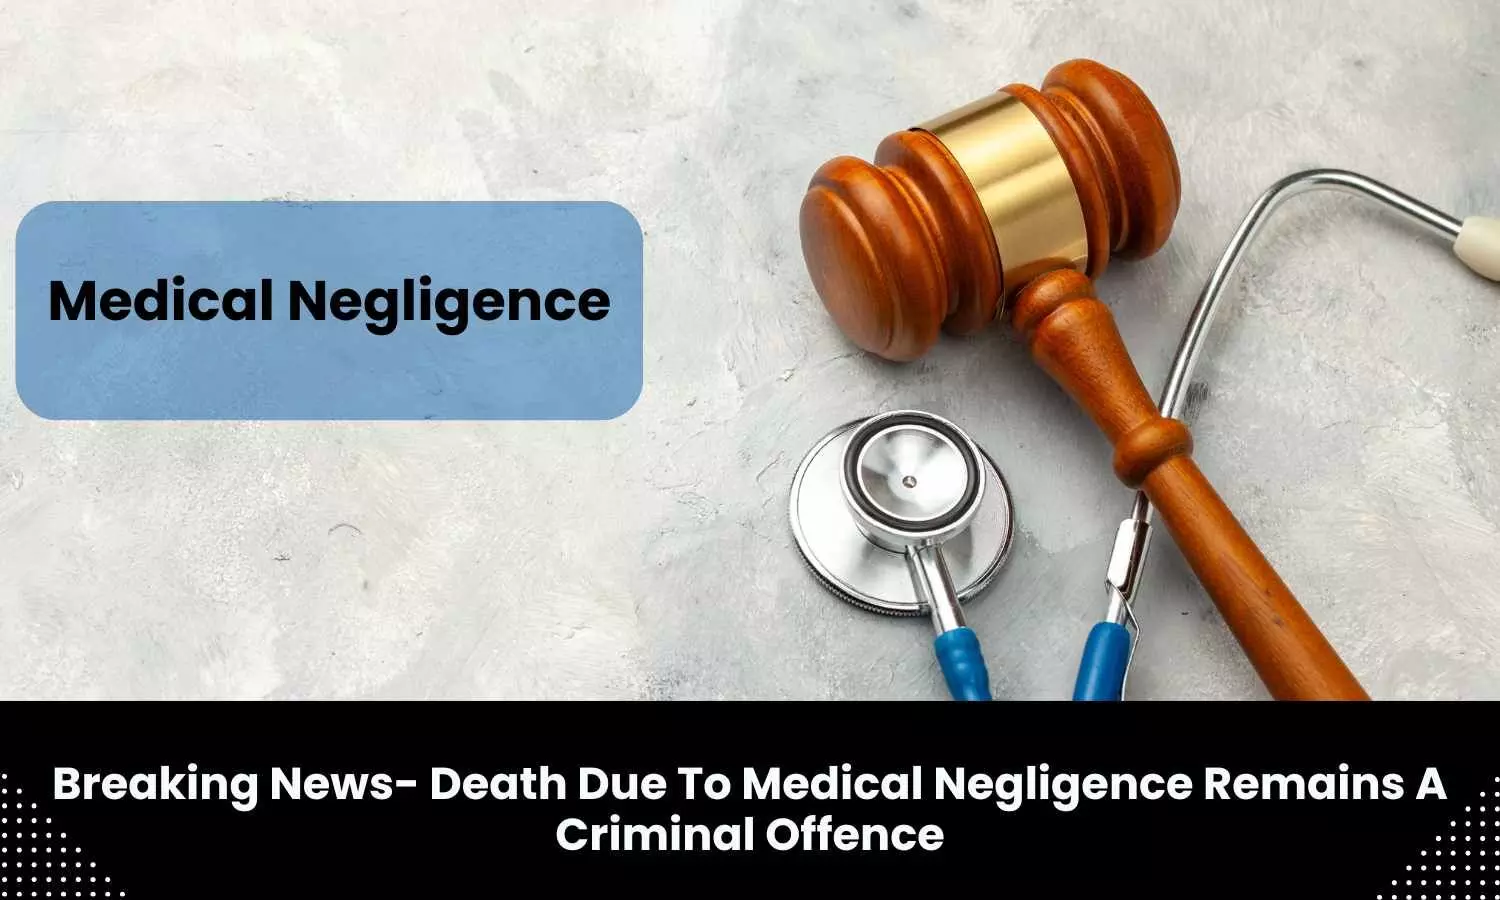 Death due to medical negligence remains criminal offence, to attract up to 2 years imprisonment: DGHS Notification